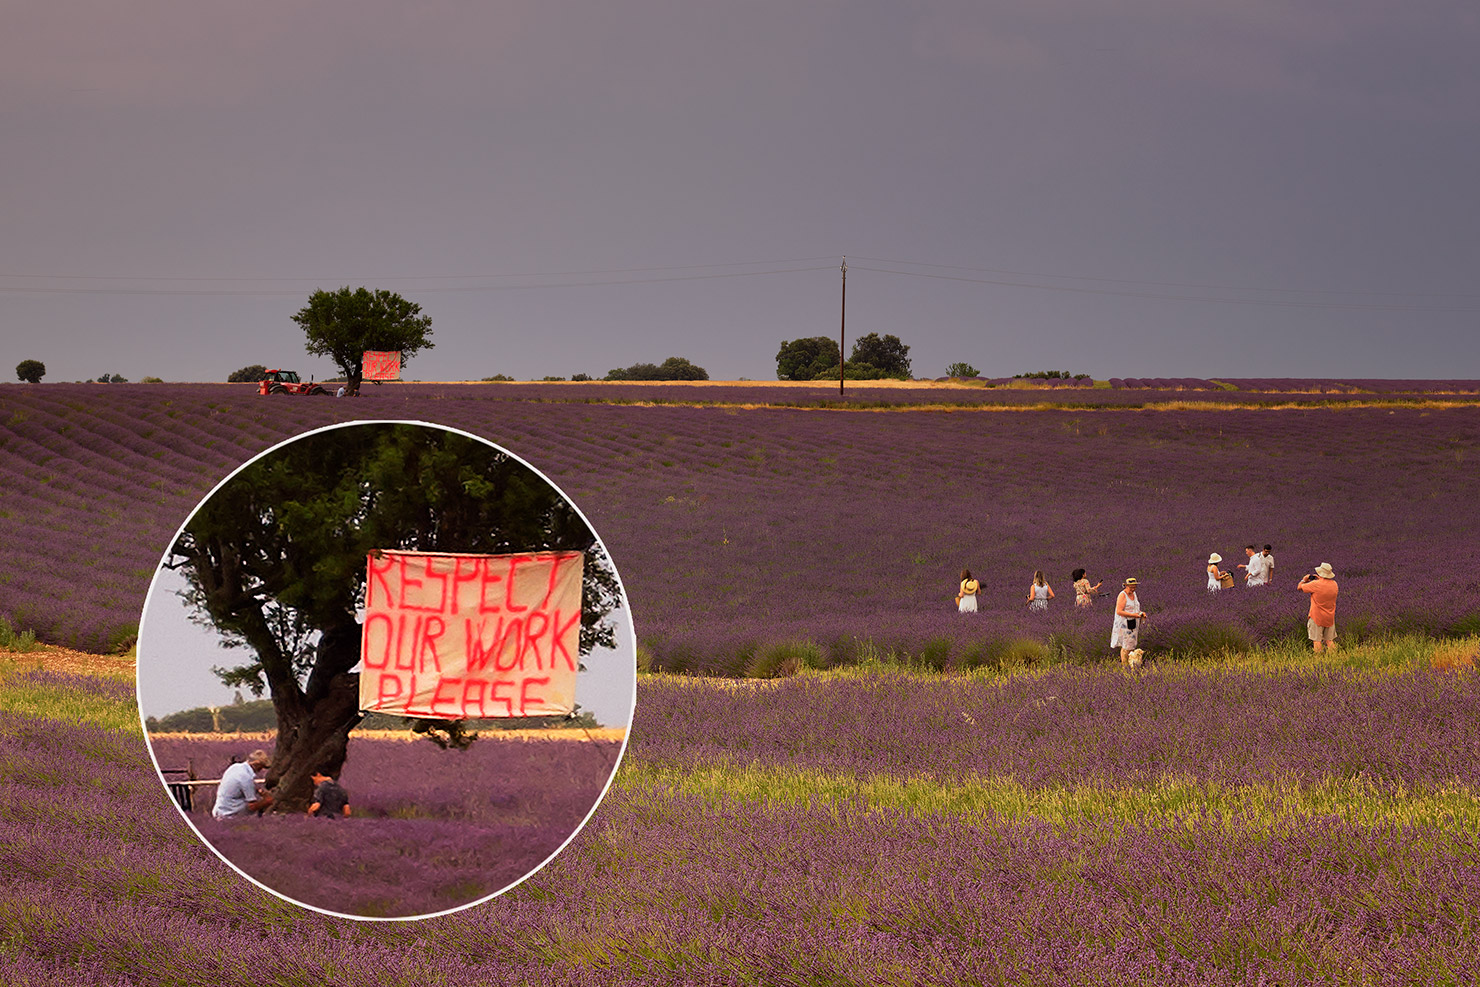 influencers instagrammers ruining selfish lavender fields provence farmer sign tree plateau de valensole 2019 paul reiffer photographer respect our work please